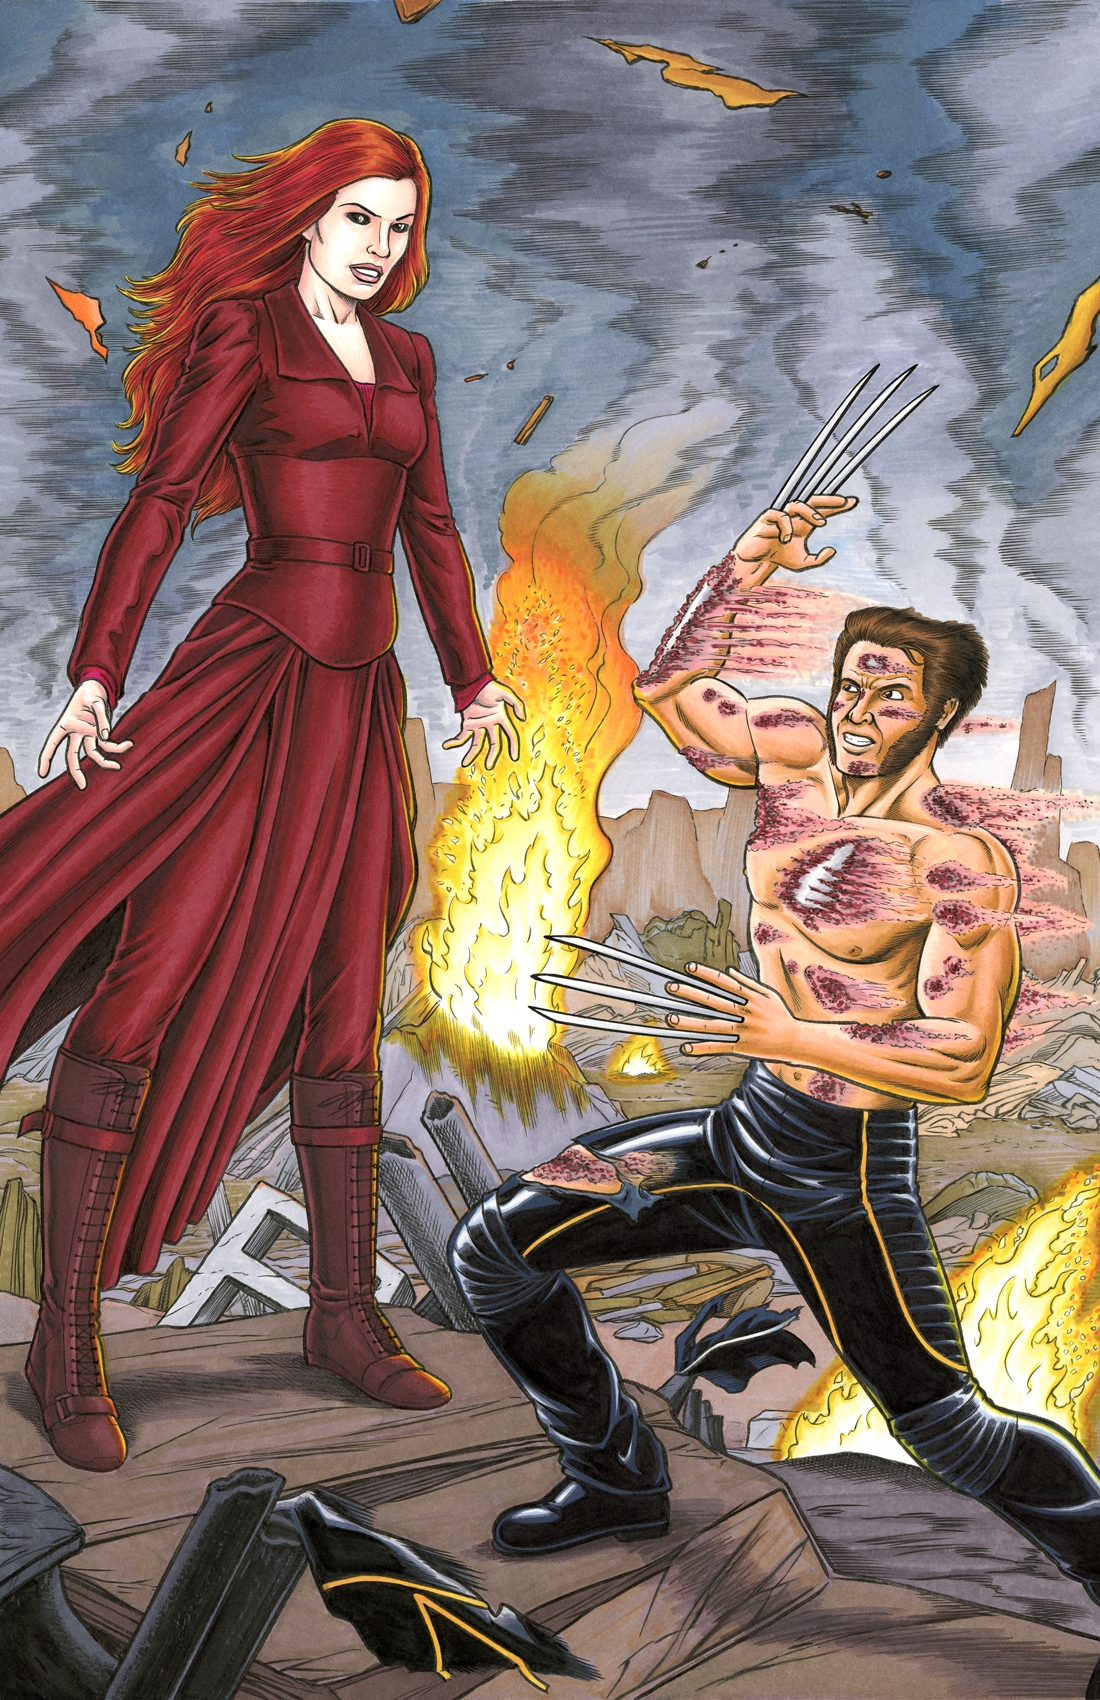 Wolverine Vs Jean Grey In Brendon And Brian Fraim S Commissions Comic Art Gallery Room